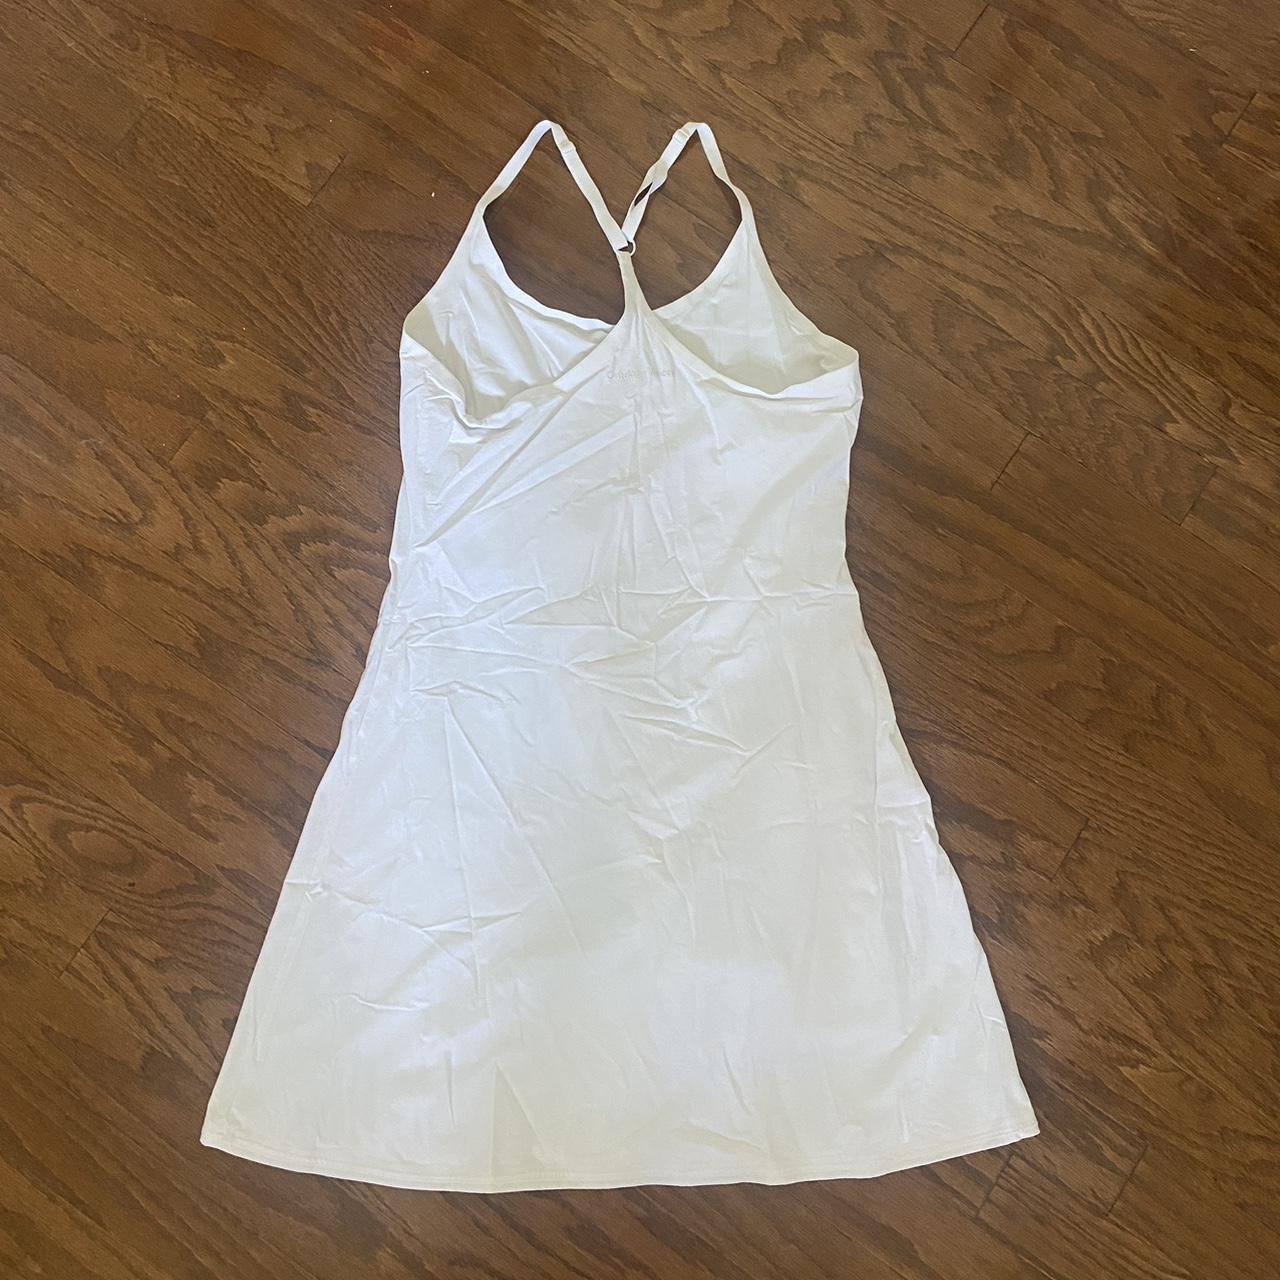 white free people exercise dress in great condition!